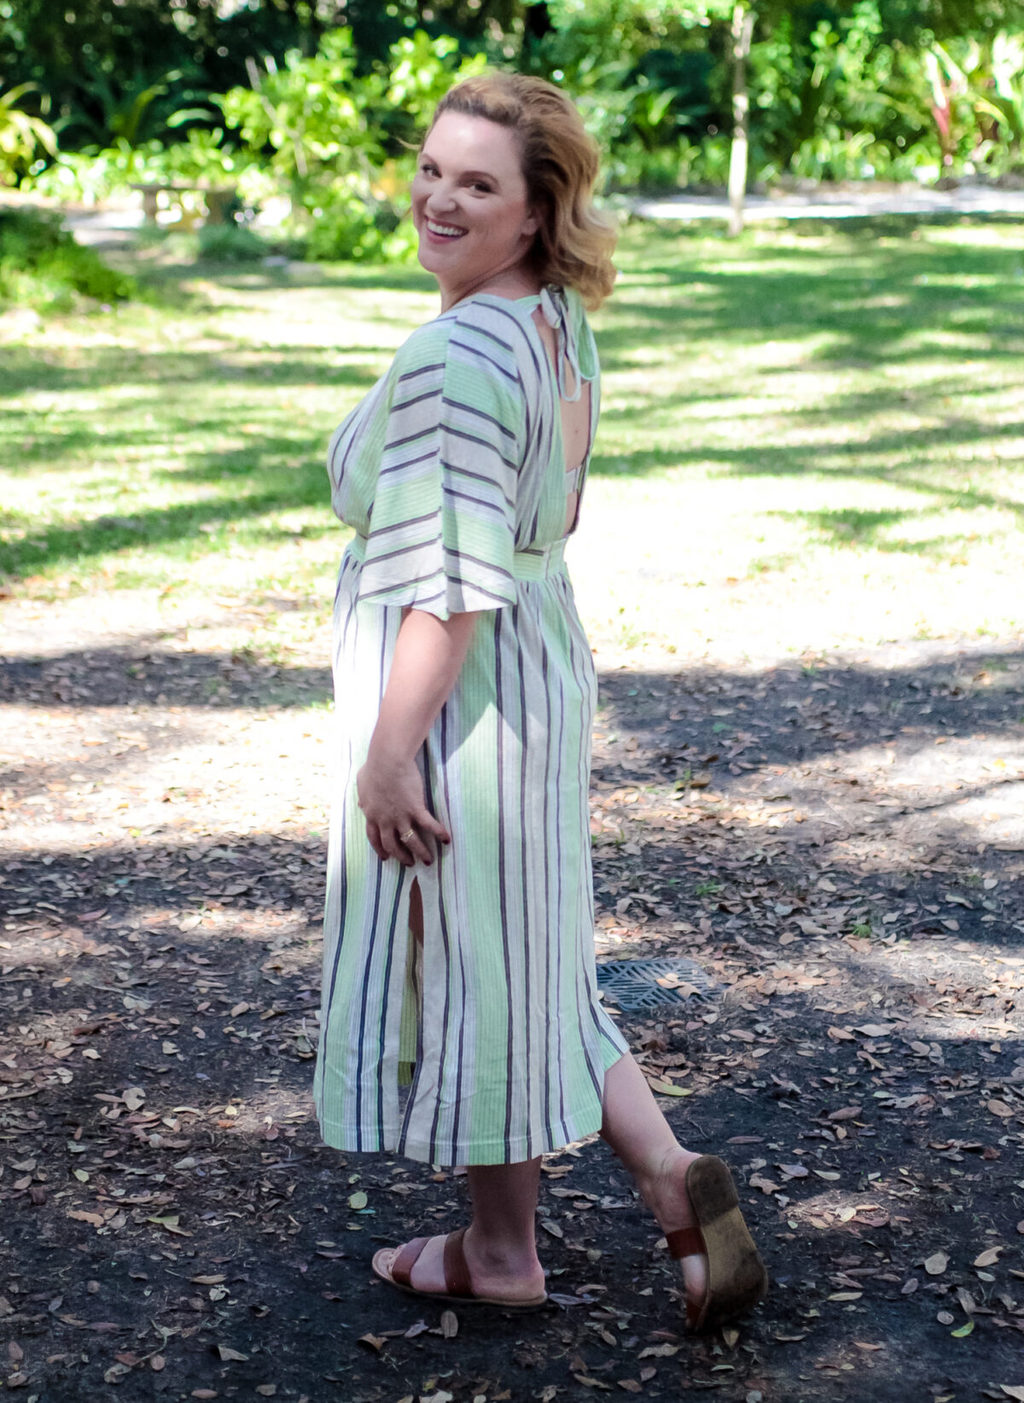 Gorgeous Spring Dresses (And More!) For Feeling Feminine, Flirty, And Fun!